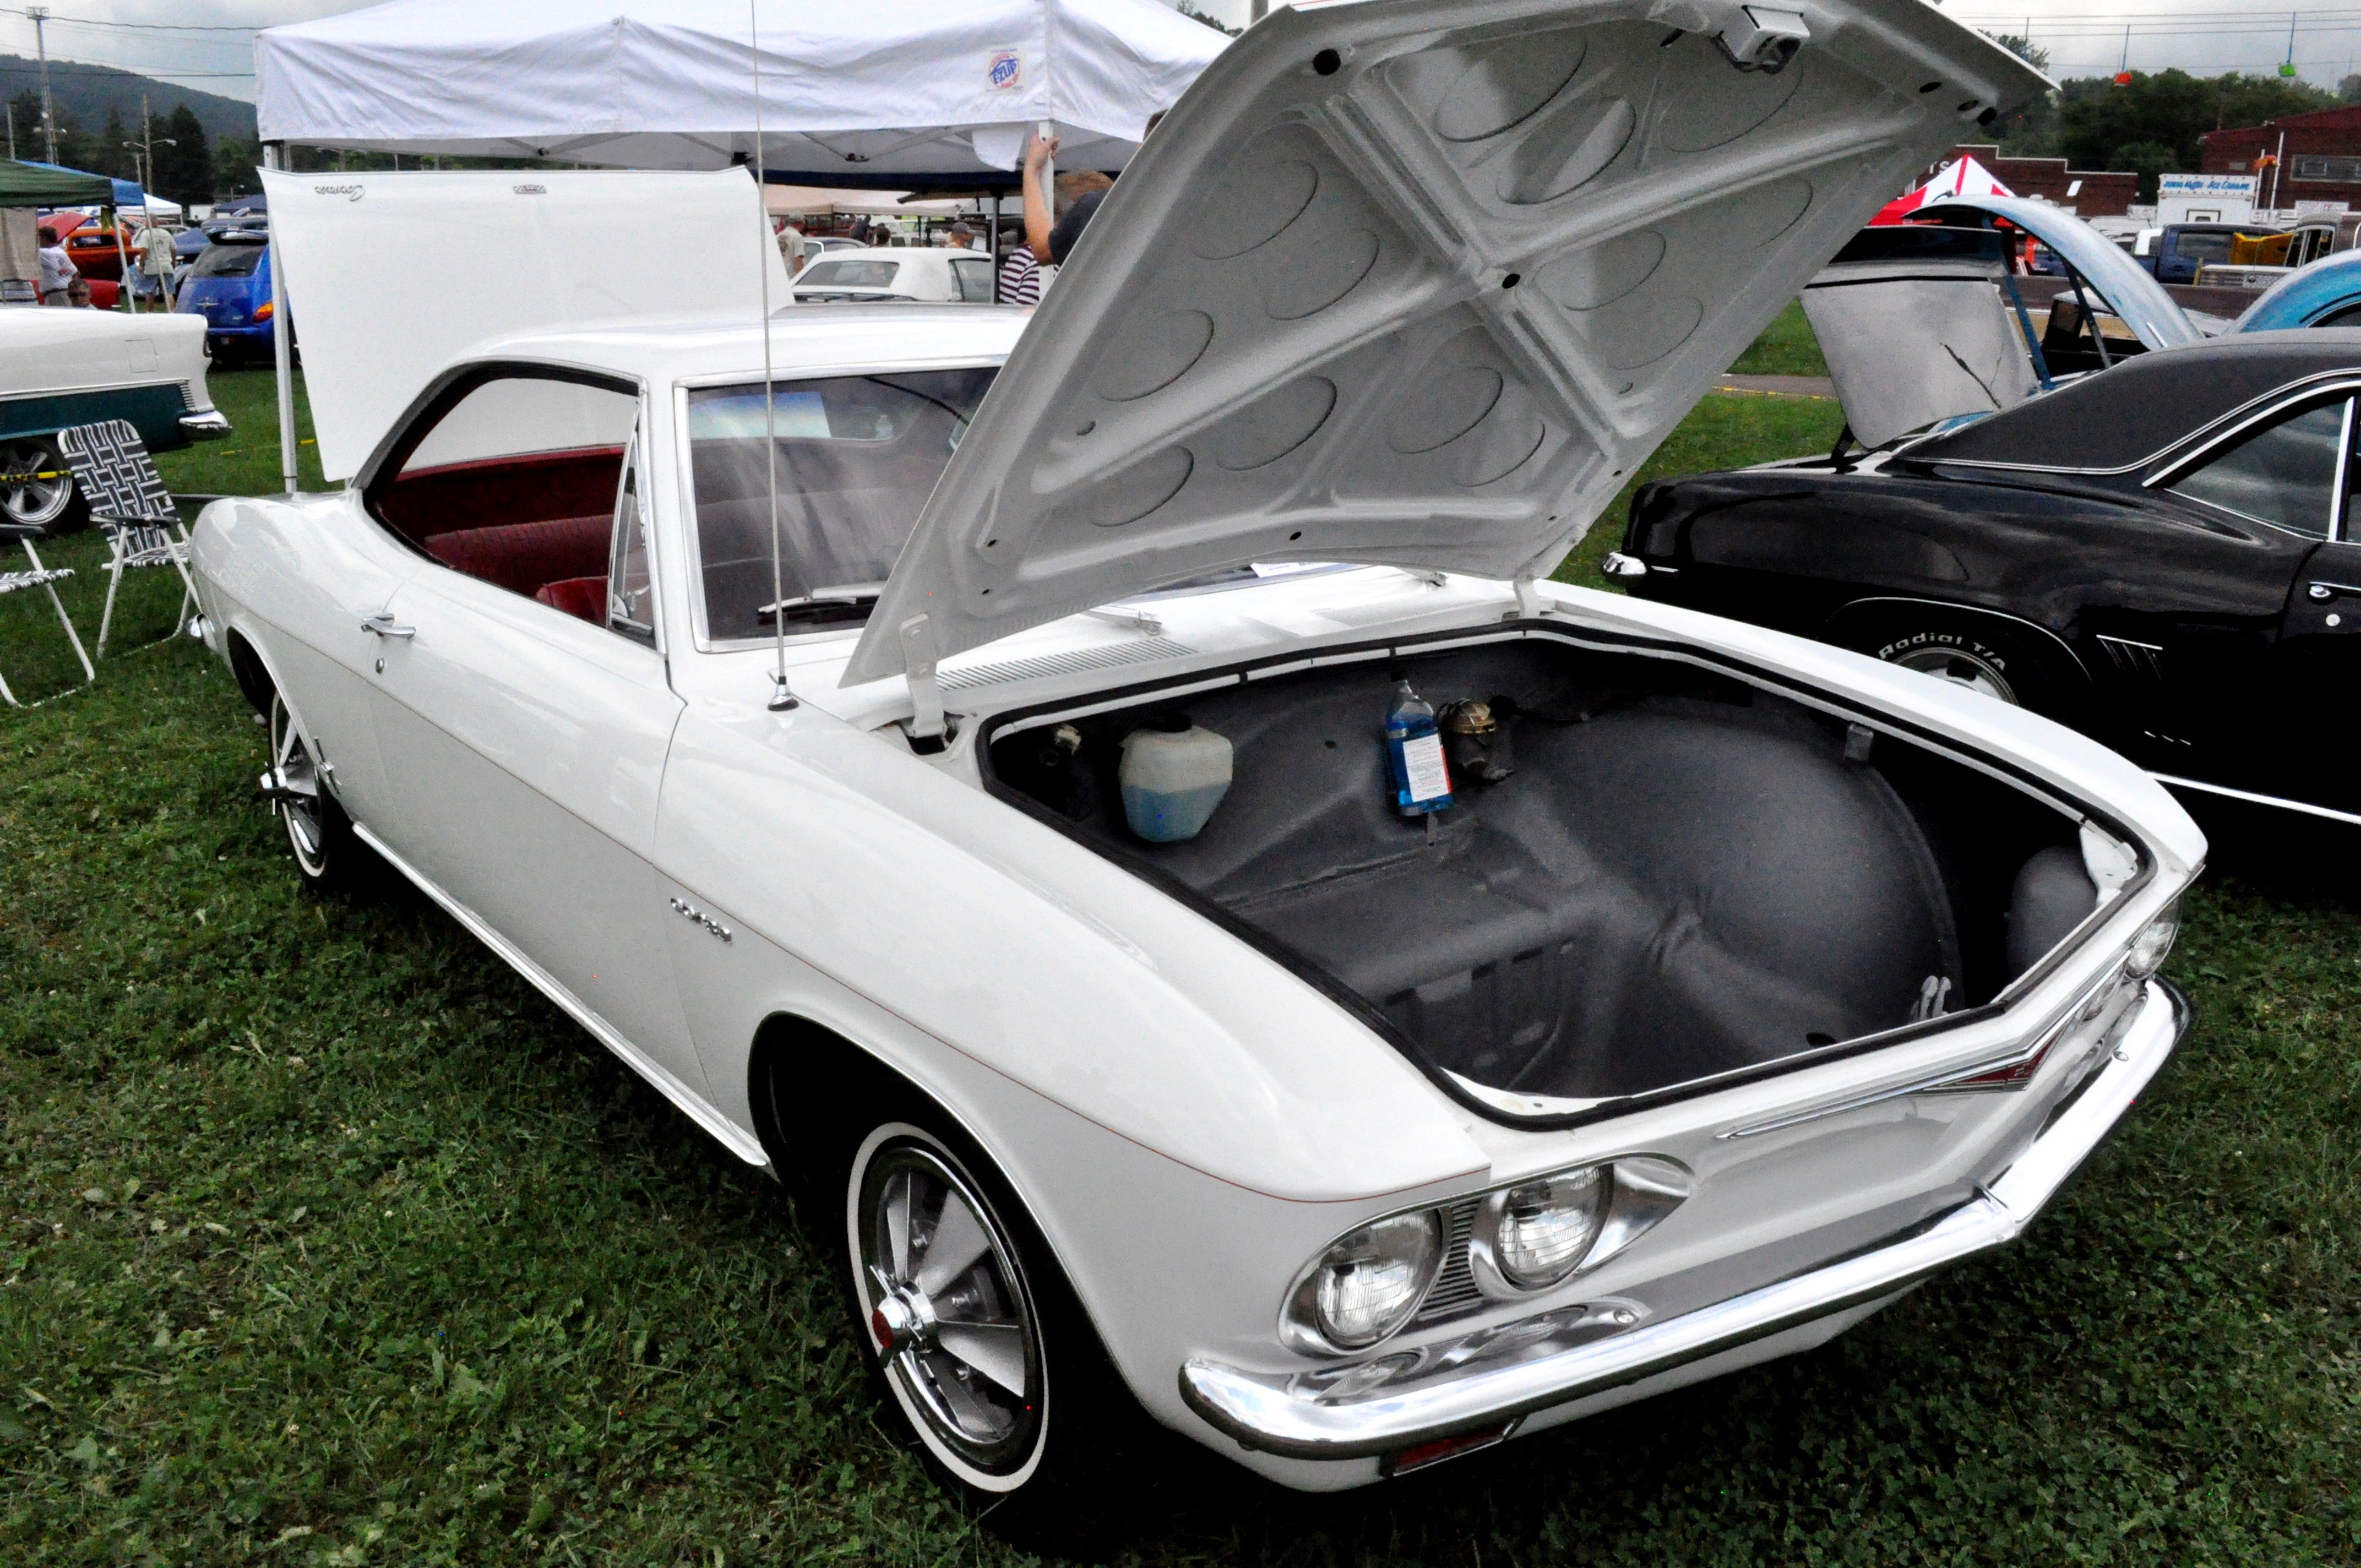 Car Collector Corner - Those Lovable Chevy Corvairs Made.